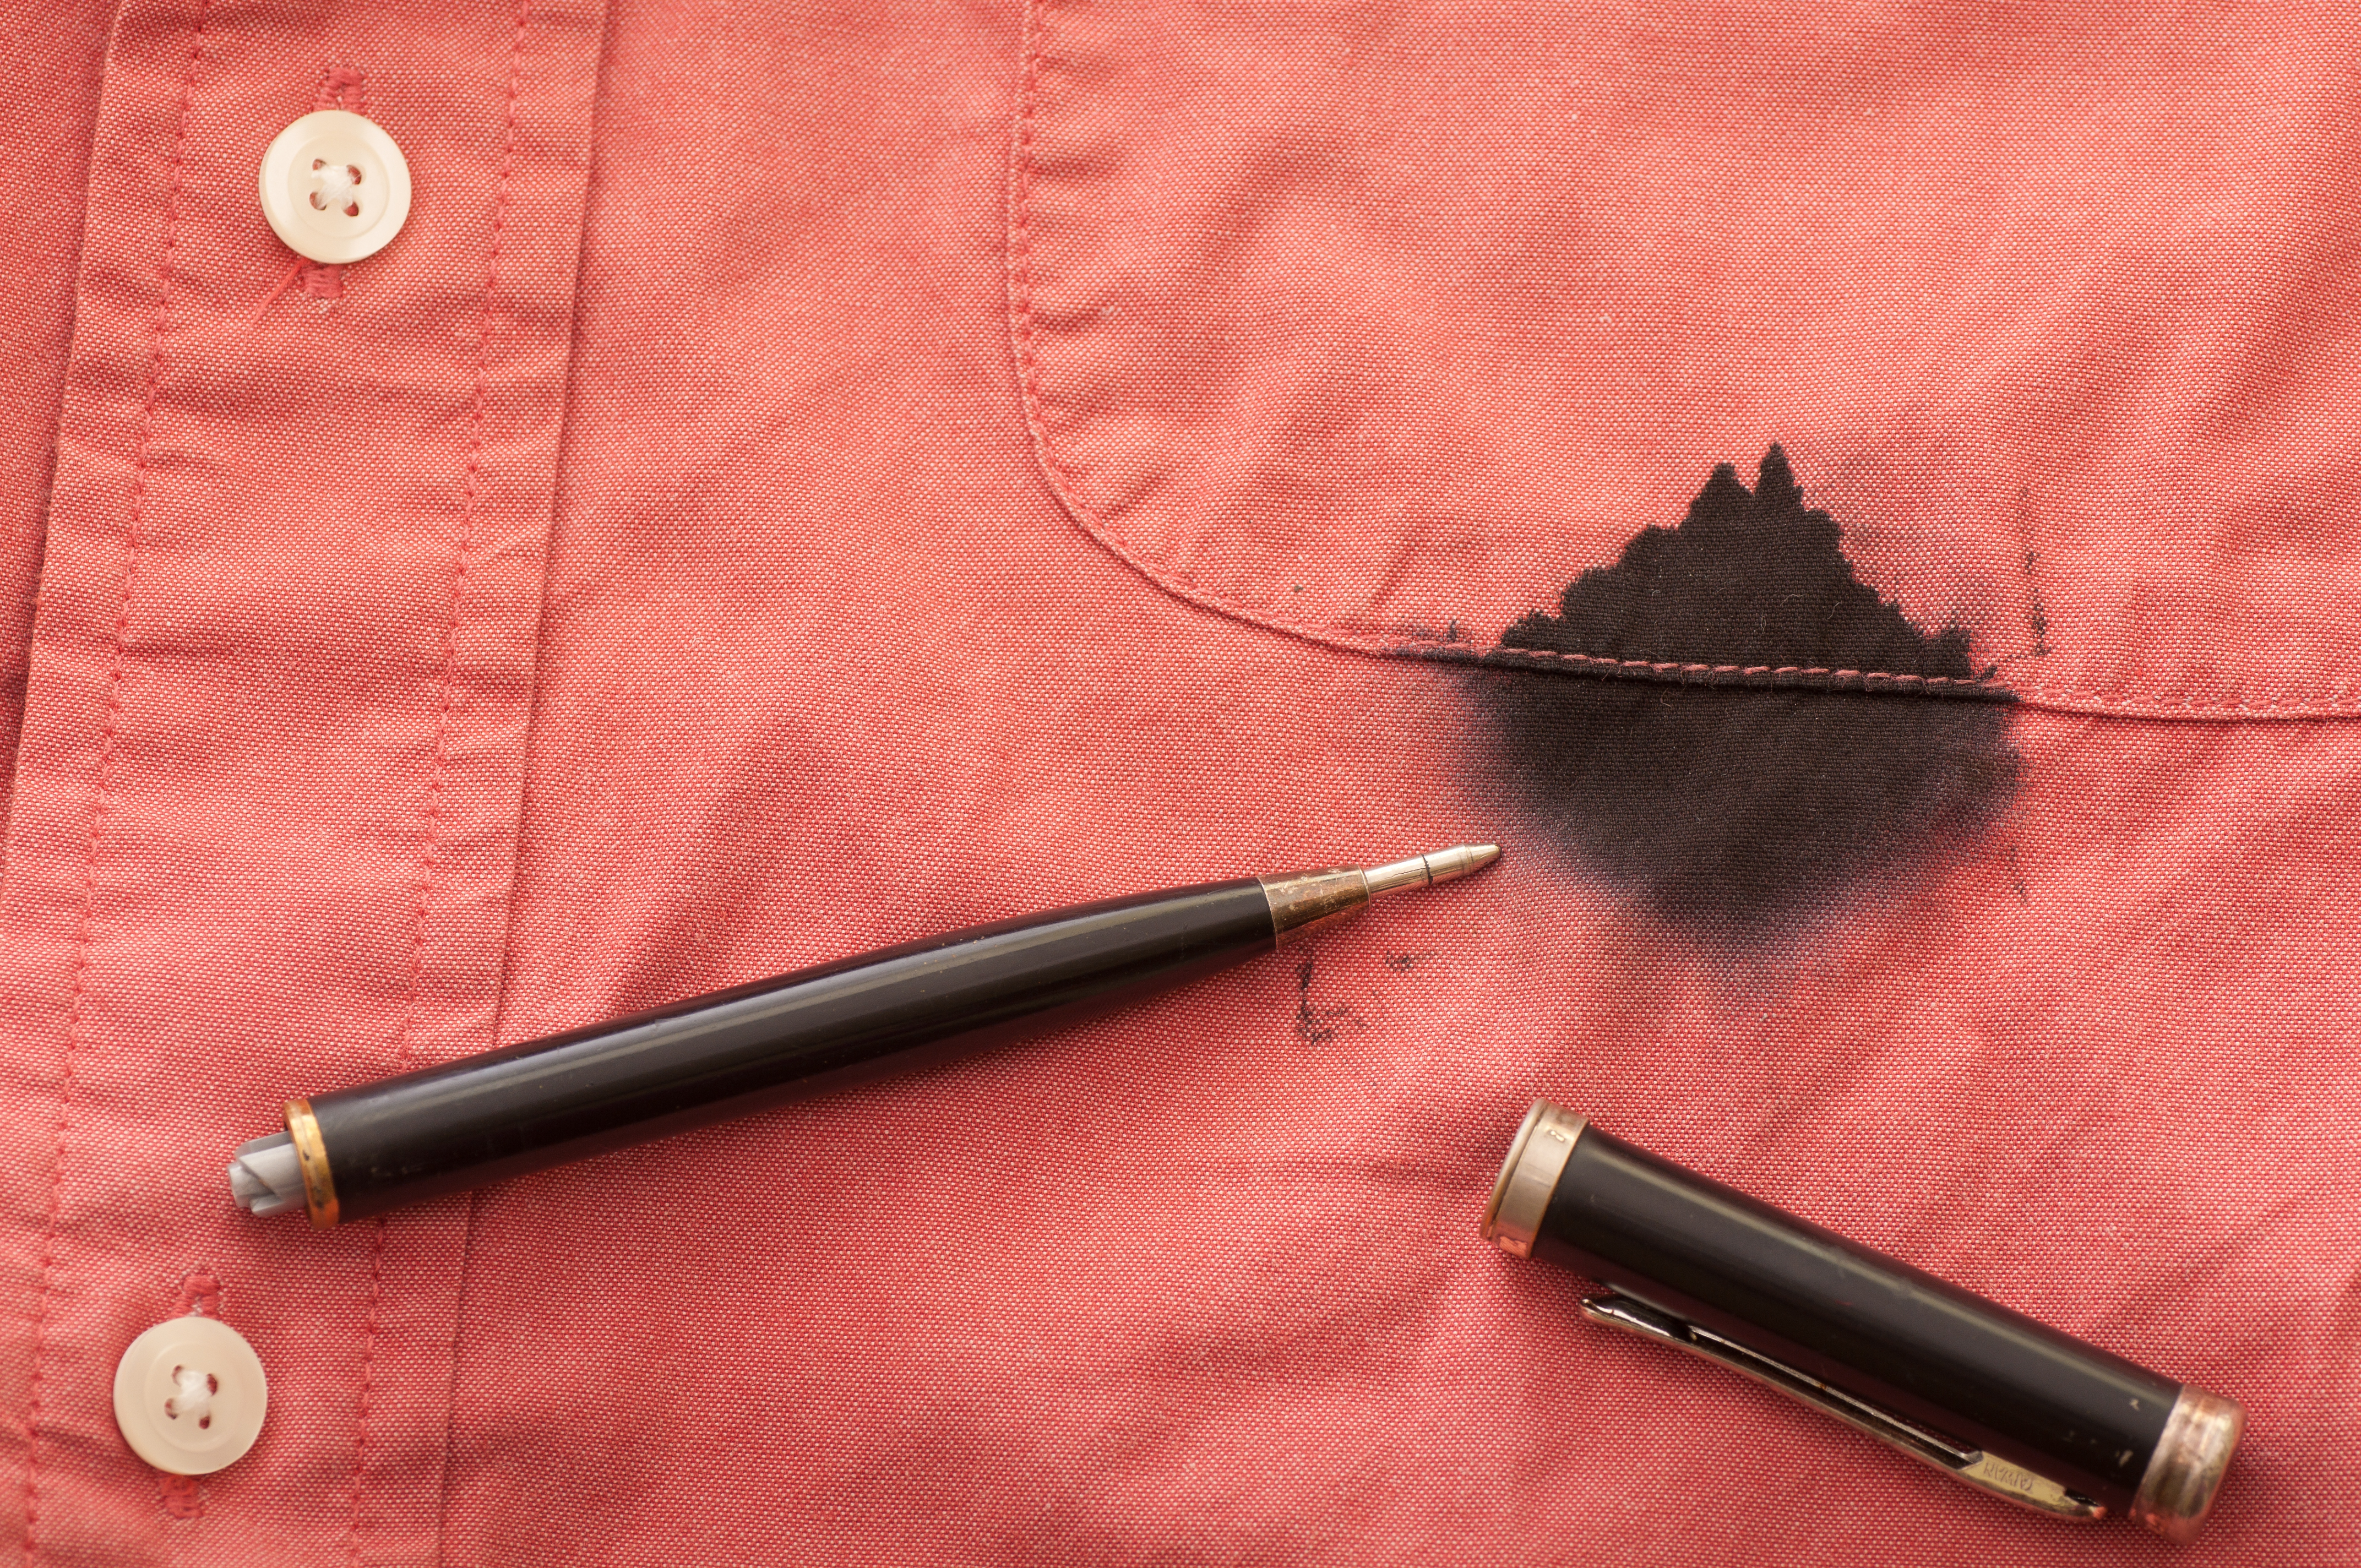 A black pen and ink stain on a salmon colored shirt | Source: Shutterstock